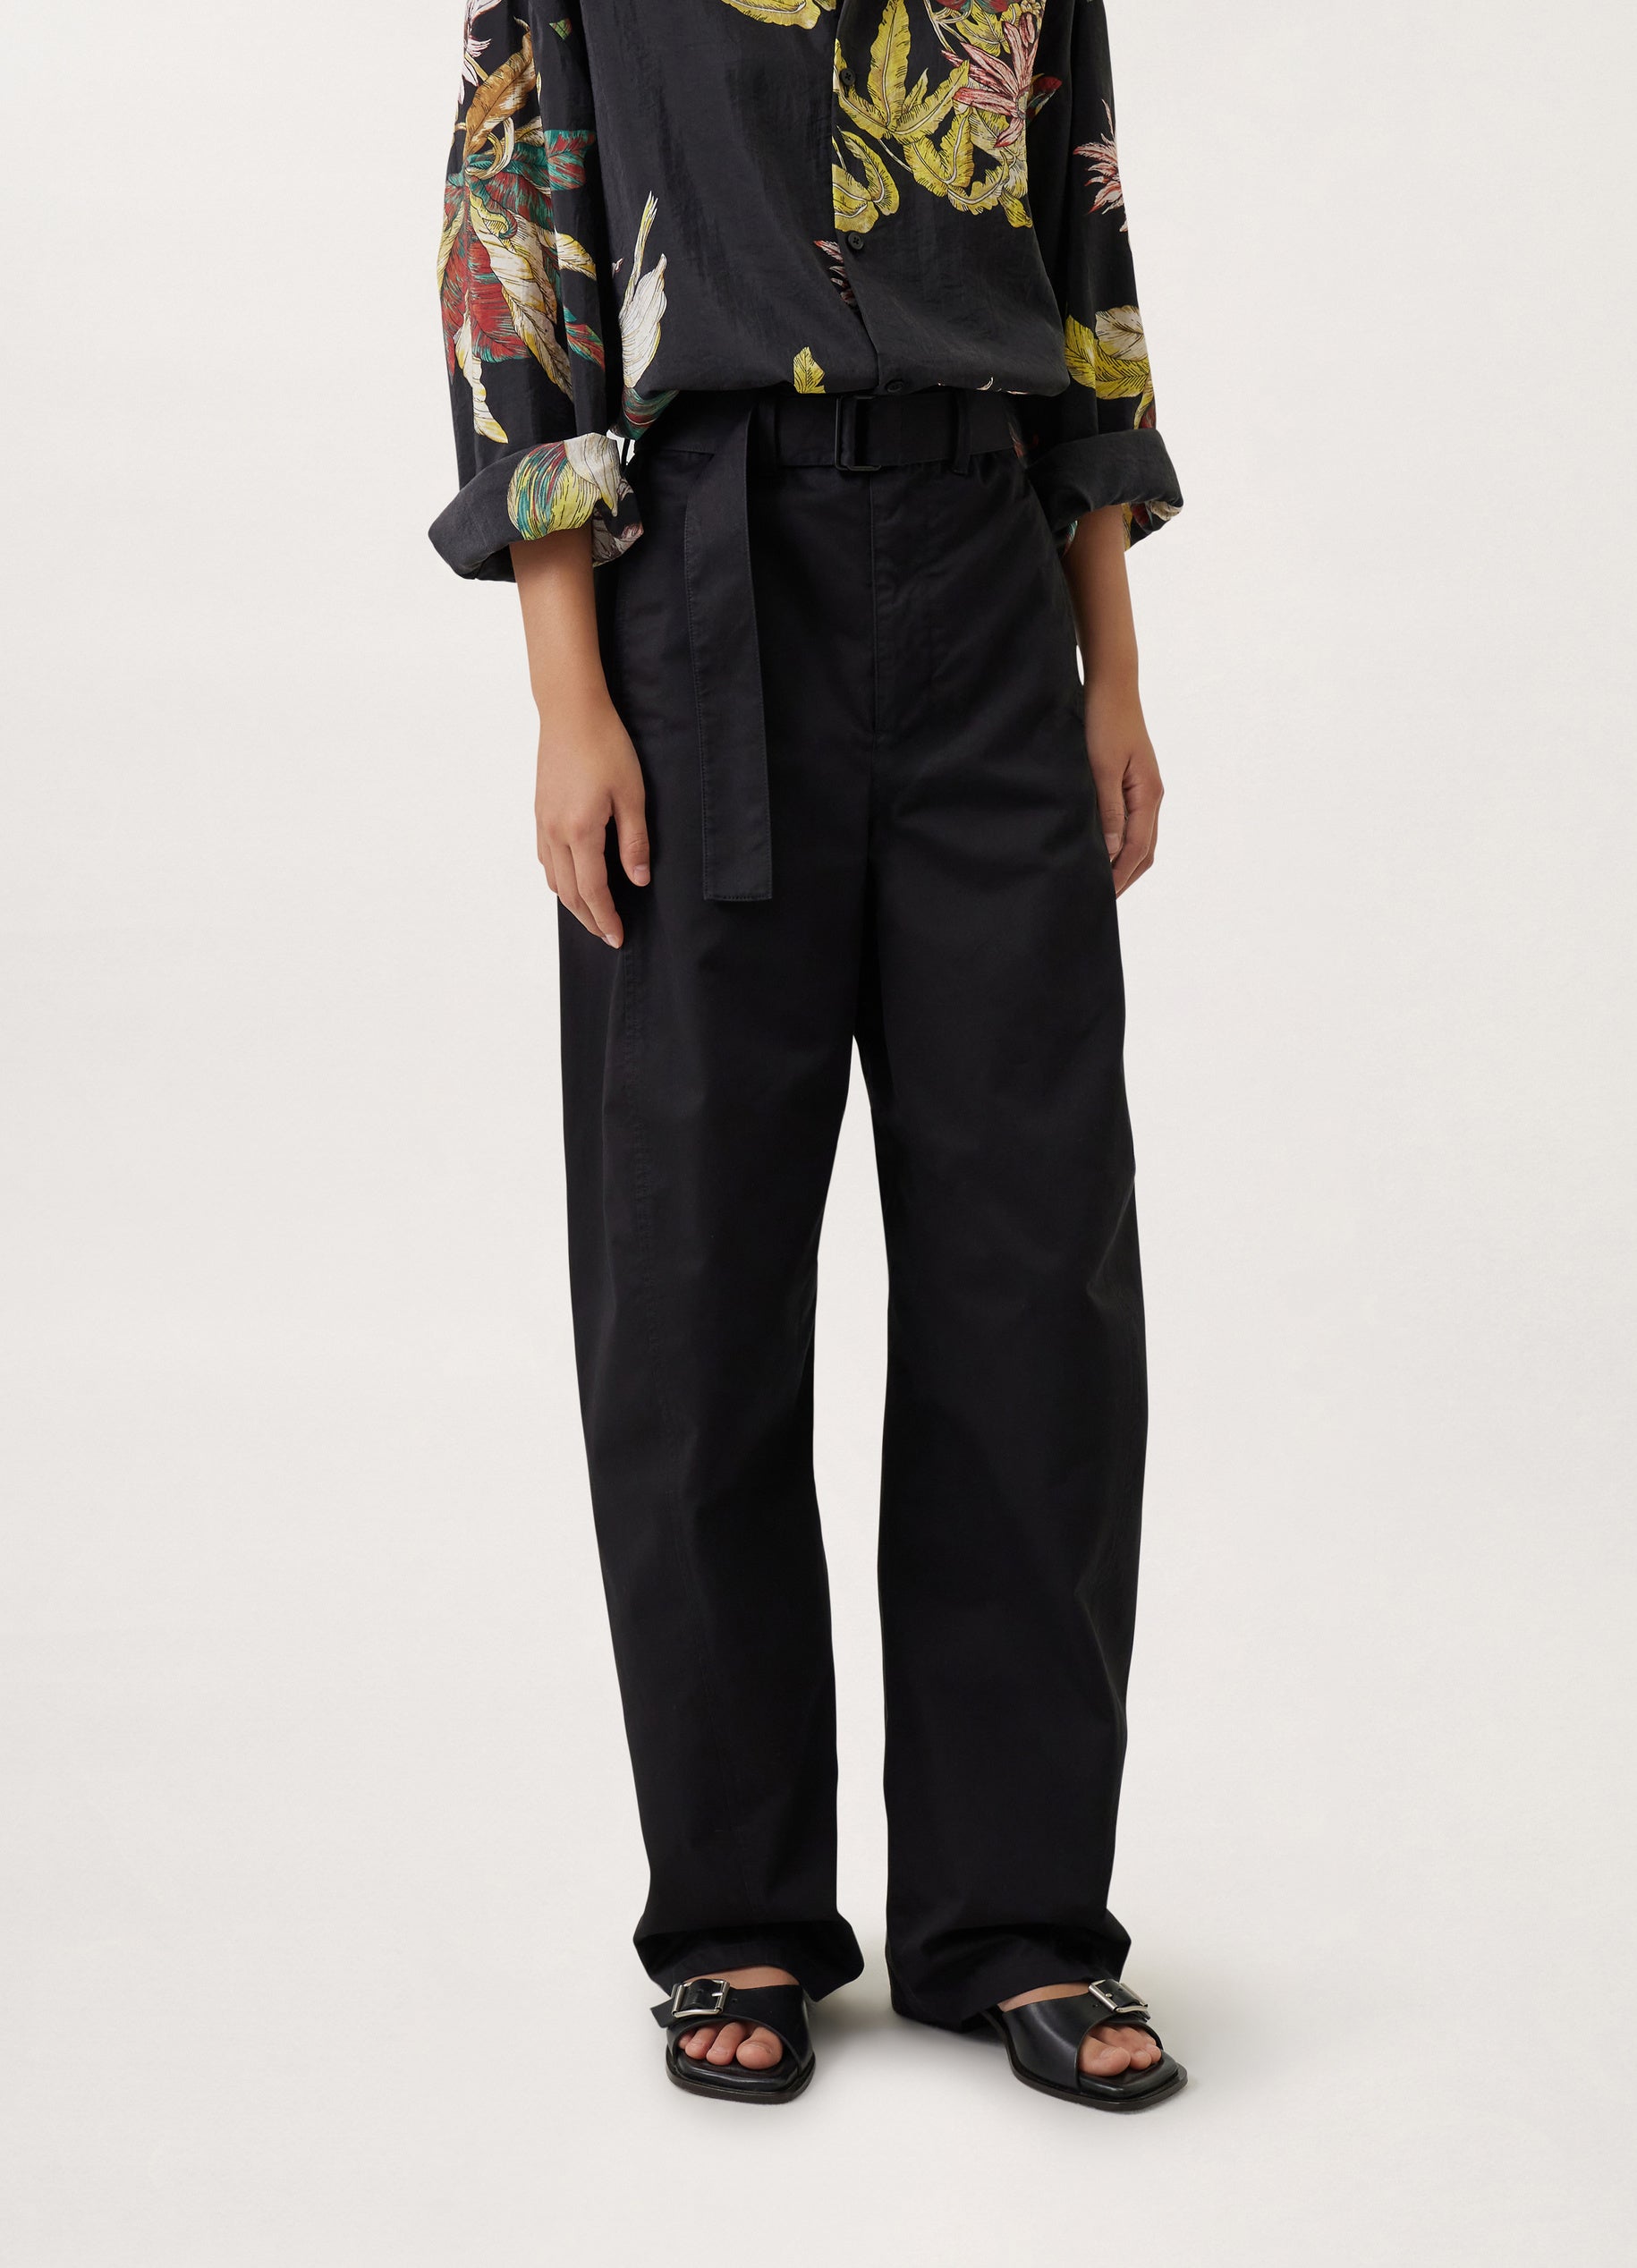 Lemaire 22aw セット売り　TWISTED BELTED PANTS股下76cm